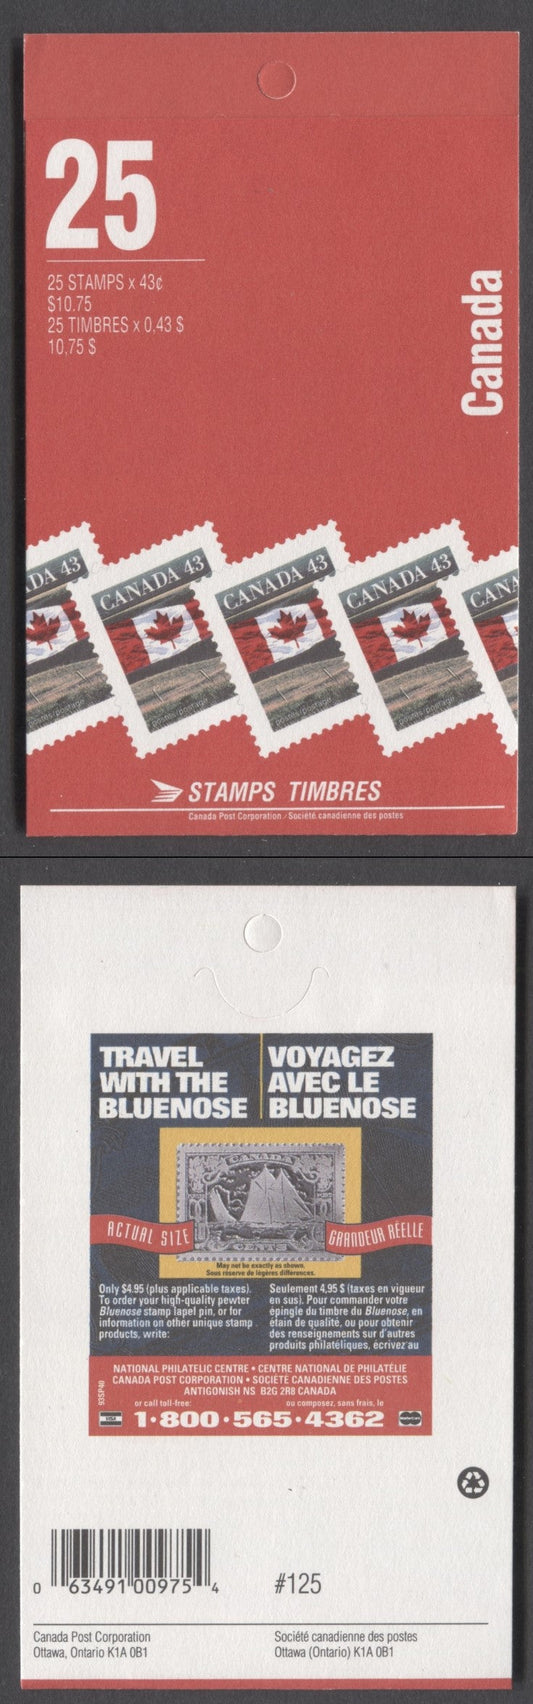 Lot 99 Canada BK154Af 1992-1994 Definitive Issue, A 43c Multicolored Booklet, Unsealed, HB Cover Cover Stock, 5 Stamps' & 'Bluenose' Covers, Leigh-Marden Printing, Perf 14.5 x 14.6, 49c & 86c Rates, Tag Bar Along Top Labels, Address in Uppercase